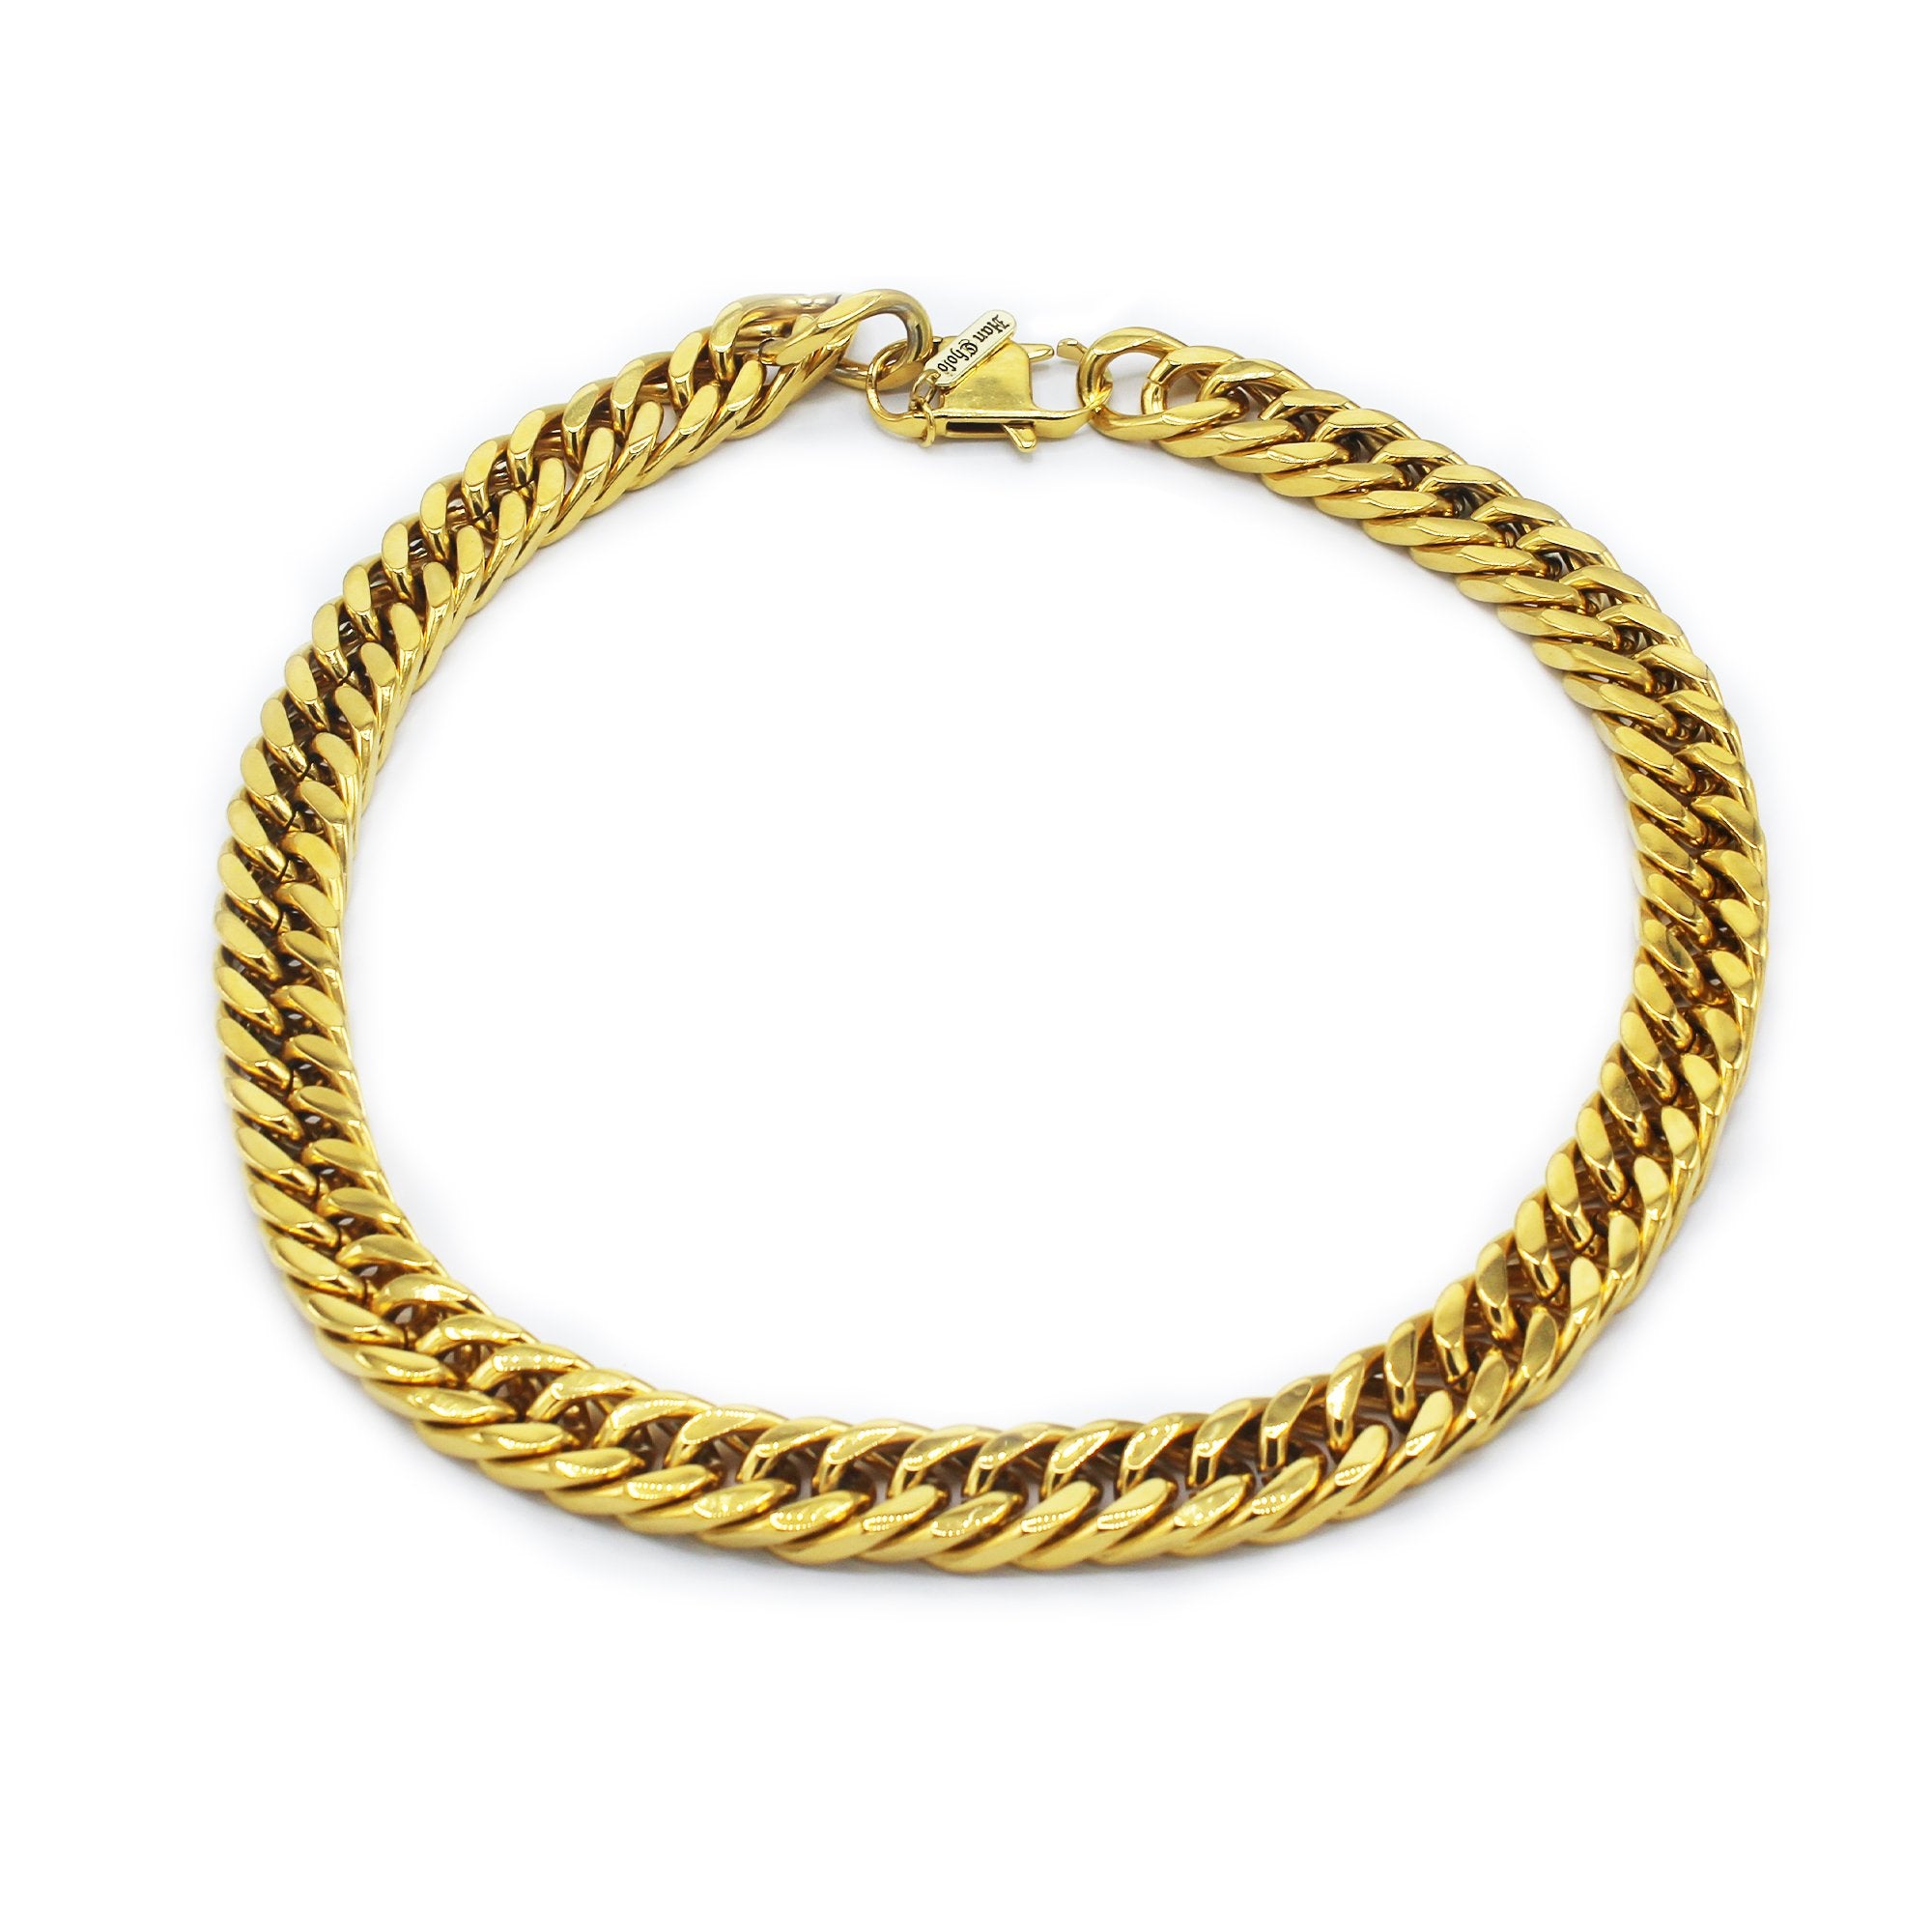 gold chain for men, 15mm thick gold chain